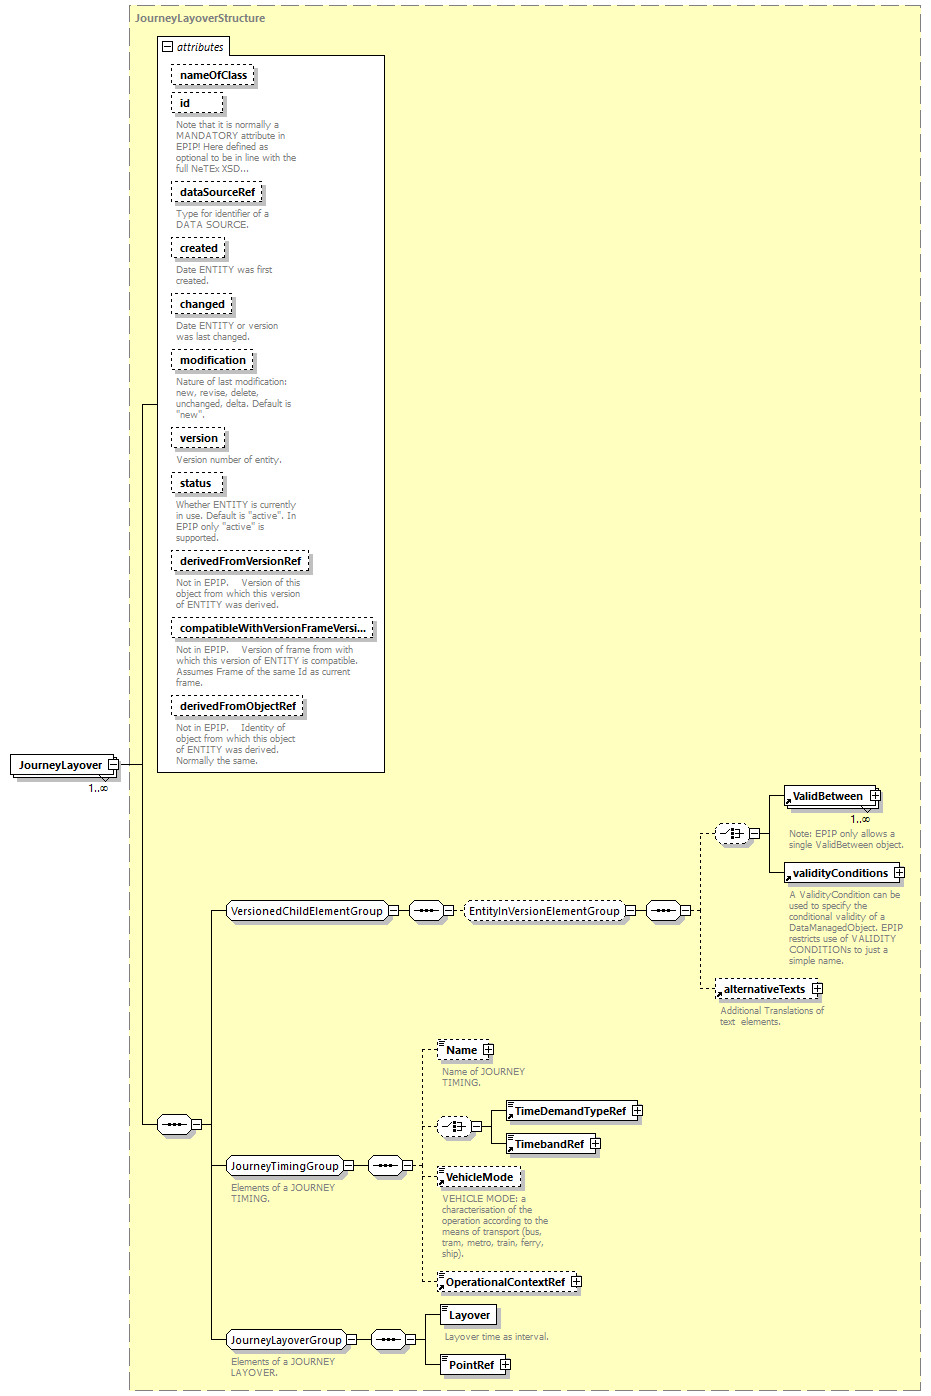 reduced_diagrams/reduced_p1157.png